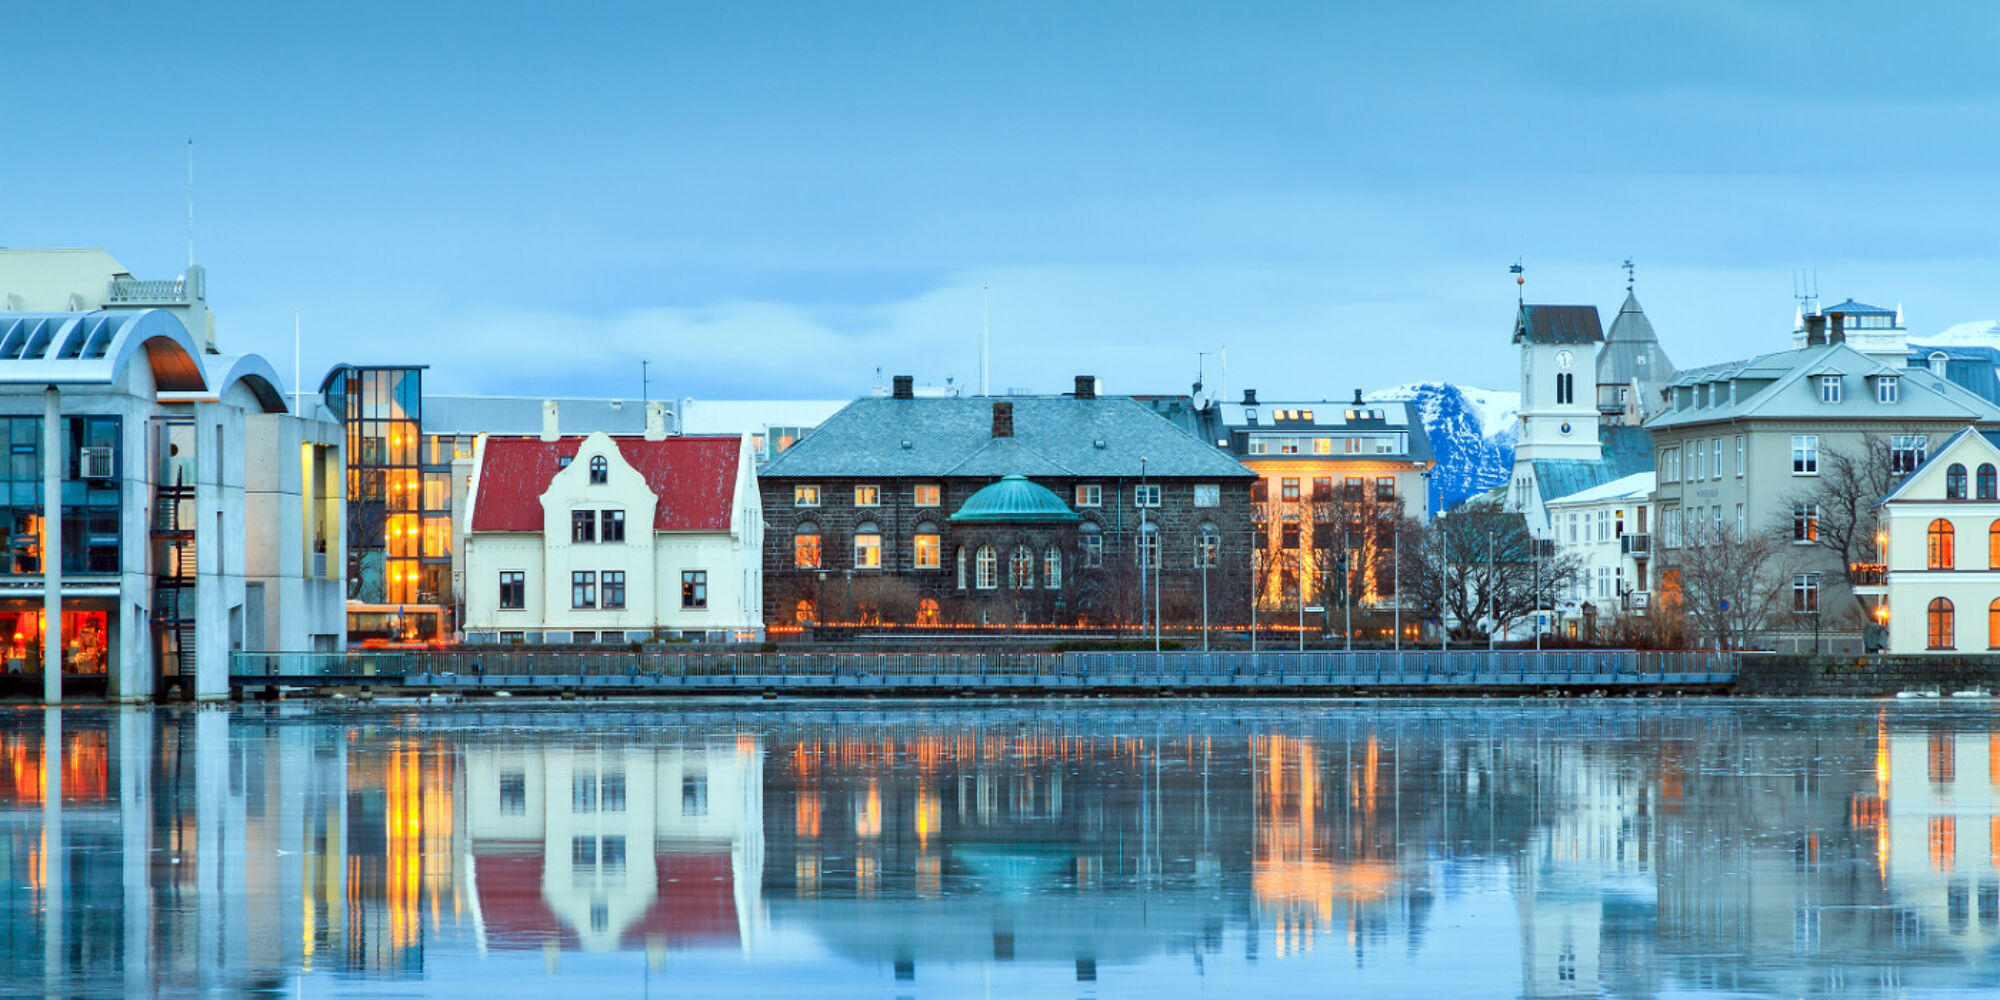 Reflection of the parliament house Althing of Reykjavik in lake Tjornin at the blue hour in winter.